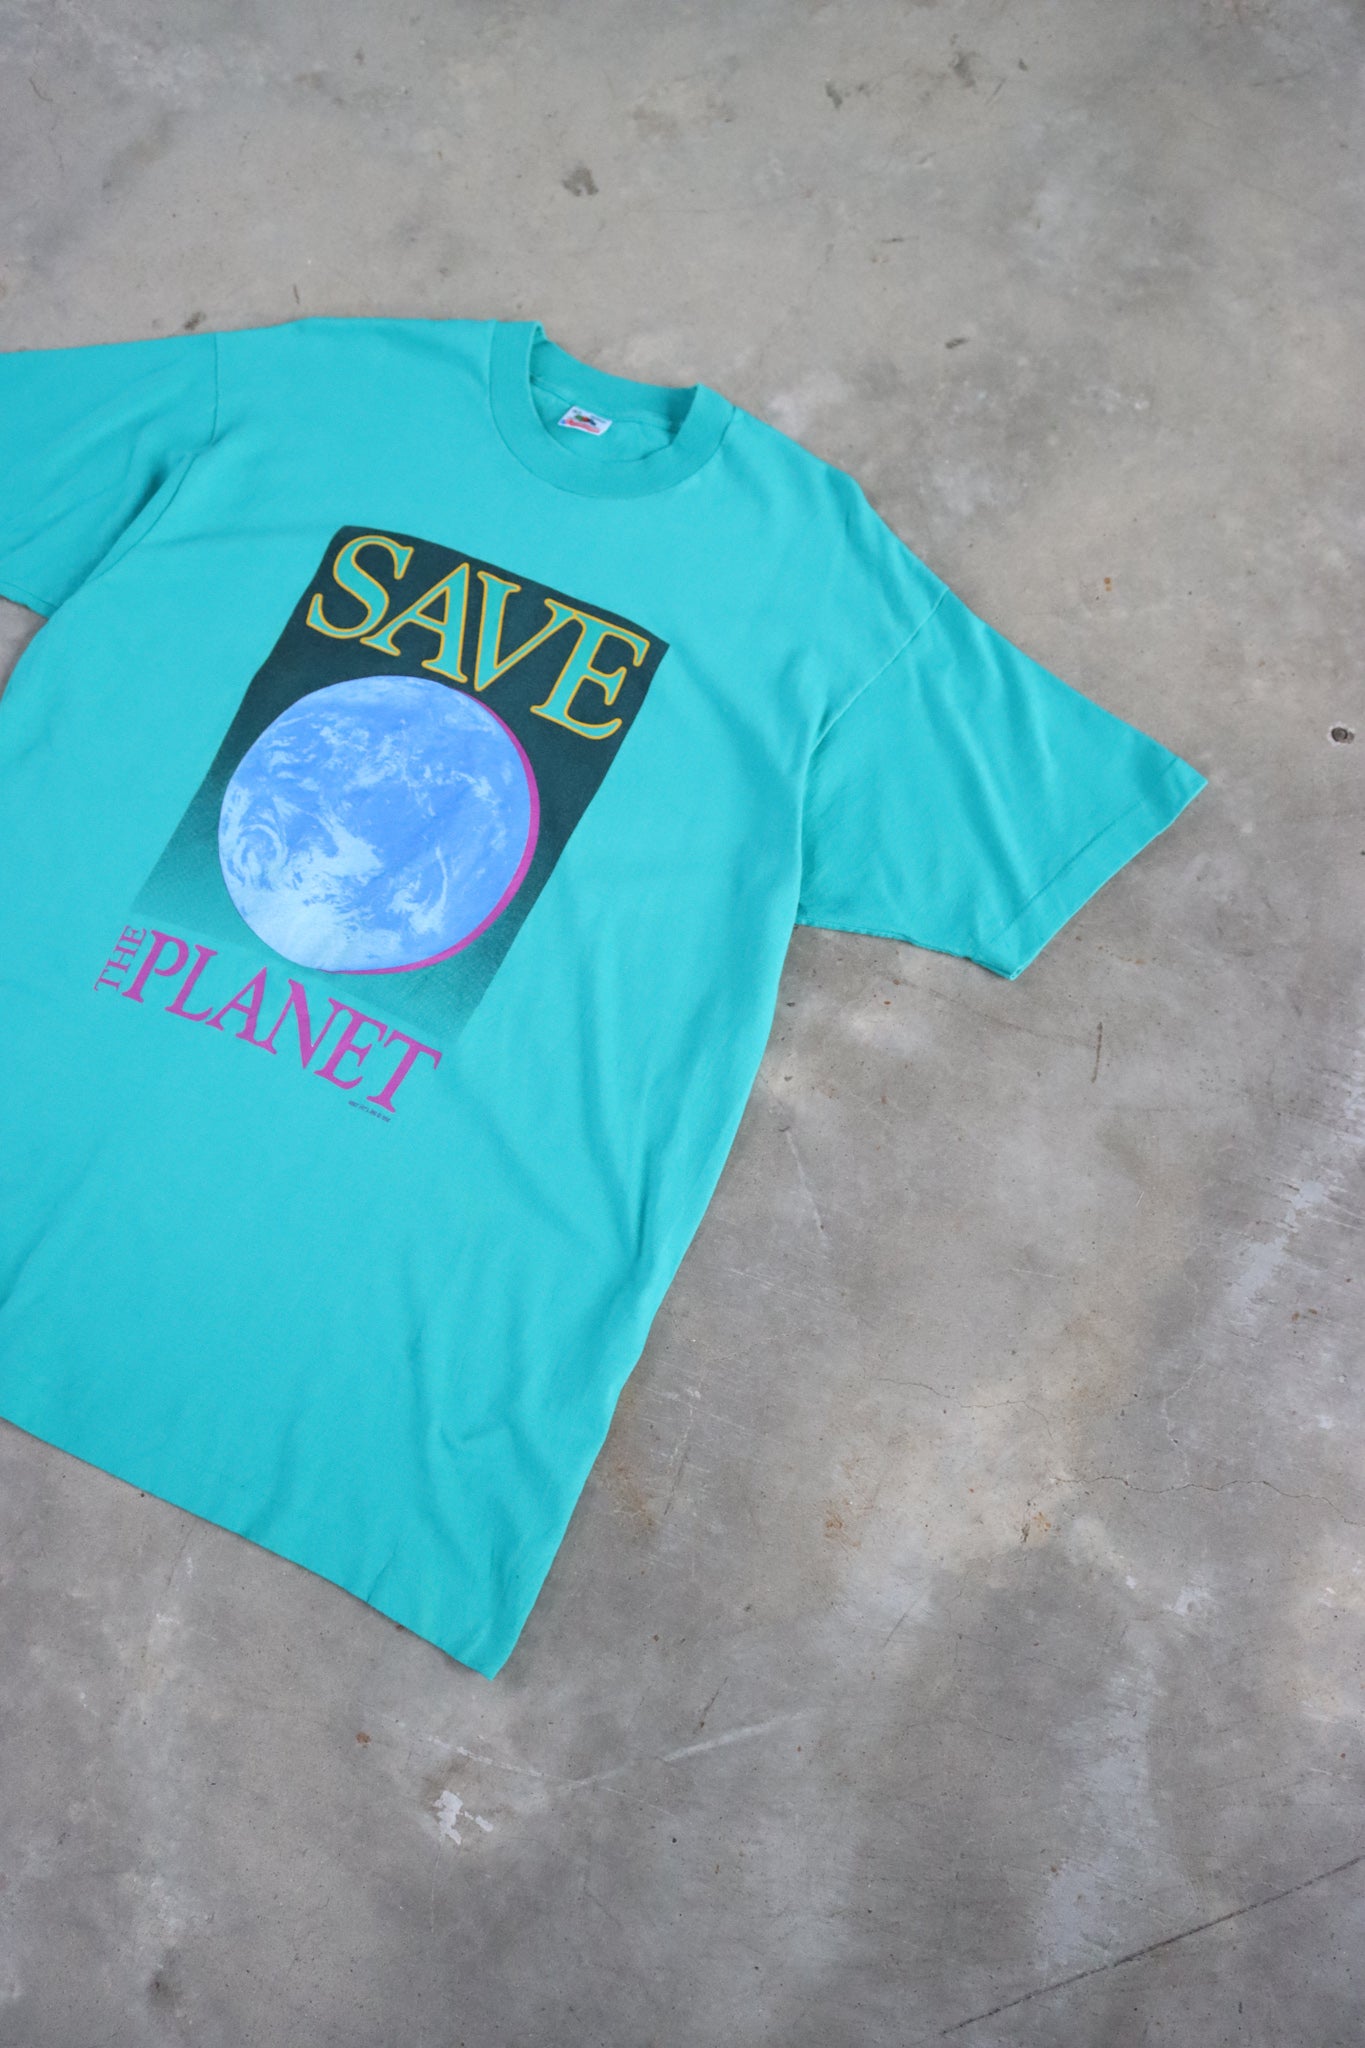 Vintage 1992 Save the Planet Tee XL